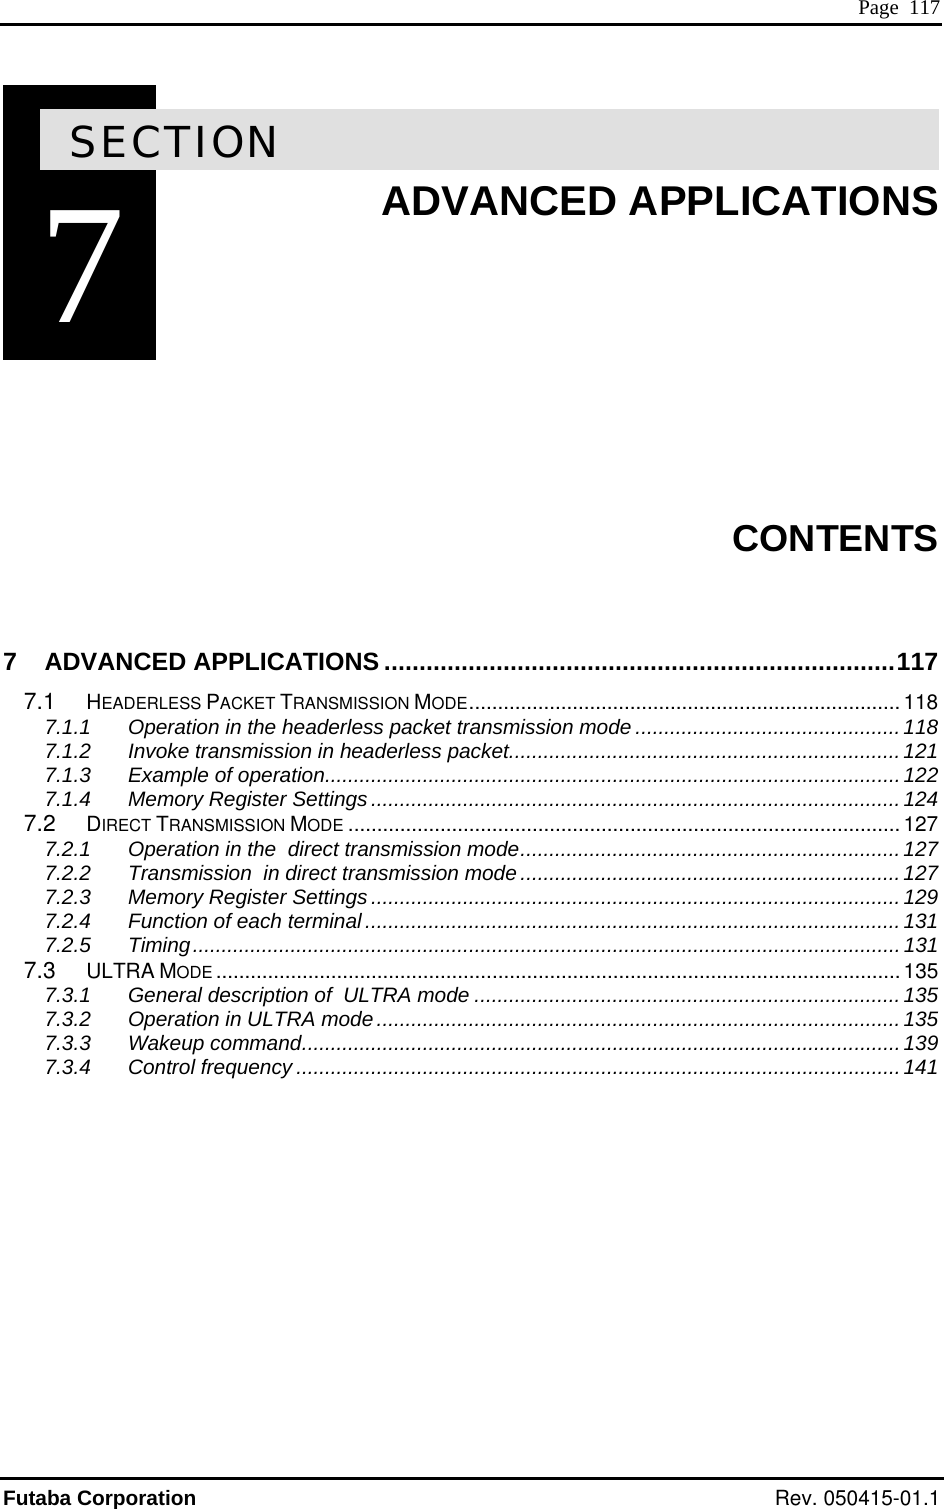  Page  117 7SECTION 7  ADVANCED APPLICATIONS         CONTENTS 7 ADVANCED APPLICATIONS .........................................................................117 7.1 HEADERLESS PACKET TRANSMISSION MODE........................................................................... 118 7.1.1 Operation in the headerless packet transmission mode .............................................. 118 7.1.2 Invoke transmission in headerless packet....................................................................121 7.1.3 Example of operation....................................................................................................122 7.1.4 Memory Register Settings............................................................................................ 124 7.2 DIRECT TRANSMISSION MODE ................................................................................................127 7.2.1 Operation in the  direct transmission mode..................................................................127 7.2.2 Transmission  in direct transmission mode.................................................................. 127 7.2.3 Memory Register Settings............................................................................................ 129 7.2.4 Function of each terminal............................................................................................. 131 7.2.5 Timing...........................................................................................................................131 7.3 ULTRA MODE .......................................................................................................................135 7.3.1 General description of  ULTRA mode .......................................................................... 135 7.3.2 Operation in ULTRA mode...........................................................................................135 7.3.3 Wakeup command........................................................................................................139 7.3.4 Control frequency .........................................................................................................141    Futaba Corporation Rev. 050415-01.1 